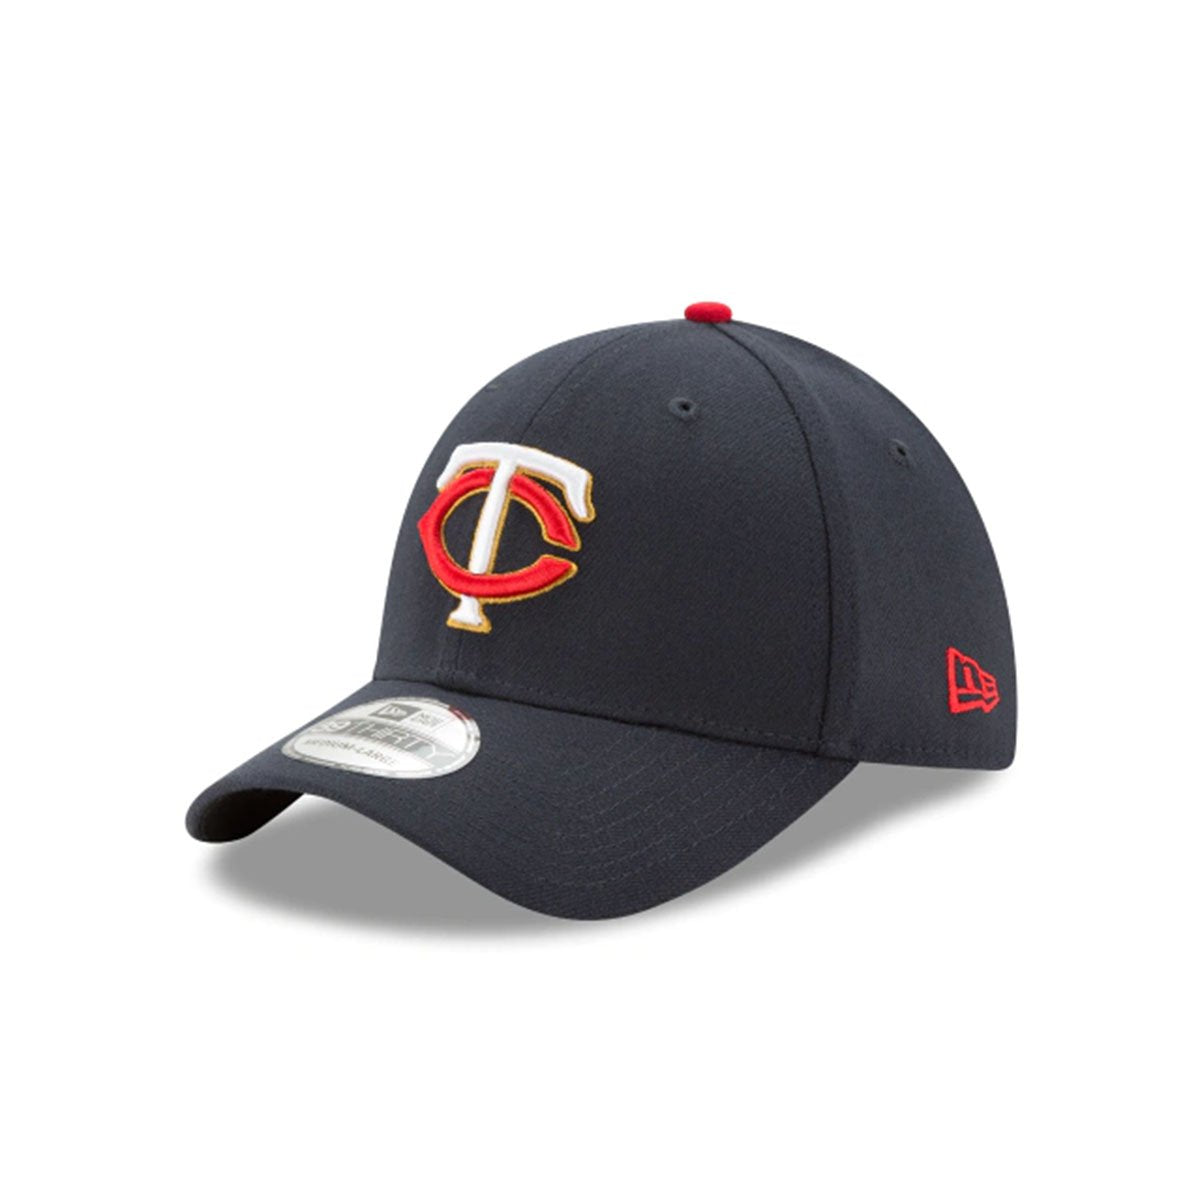 MINNESOTA TWINS TEAM CLASSIC 39THIRTY STRETCH FIT NAVY/RED